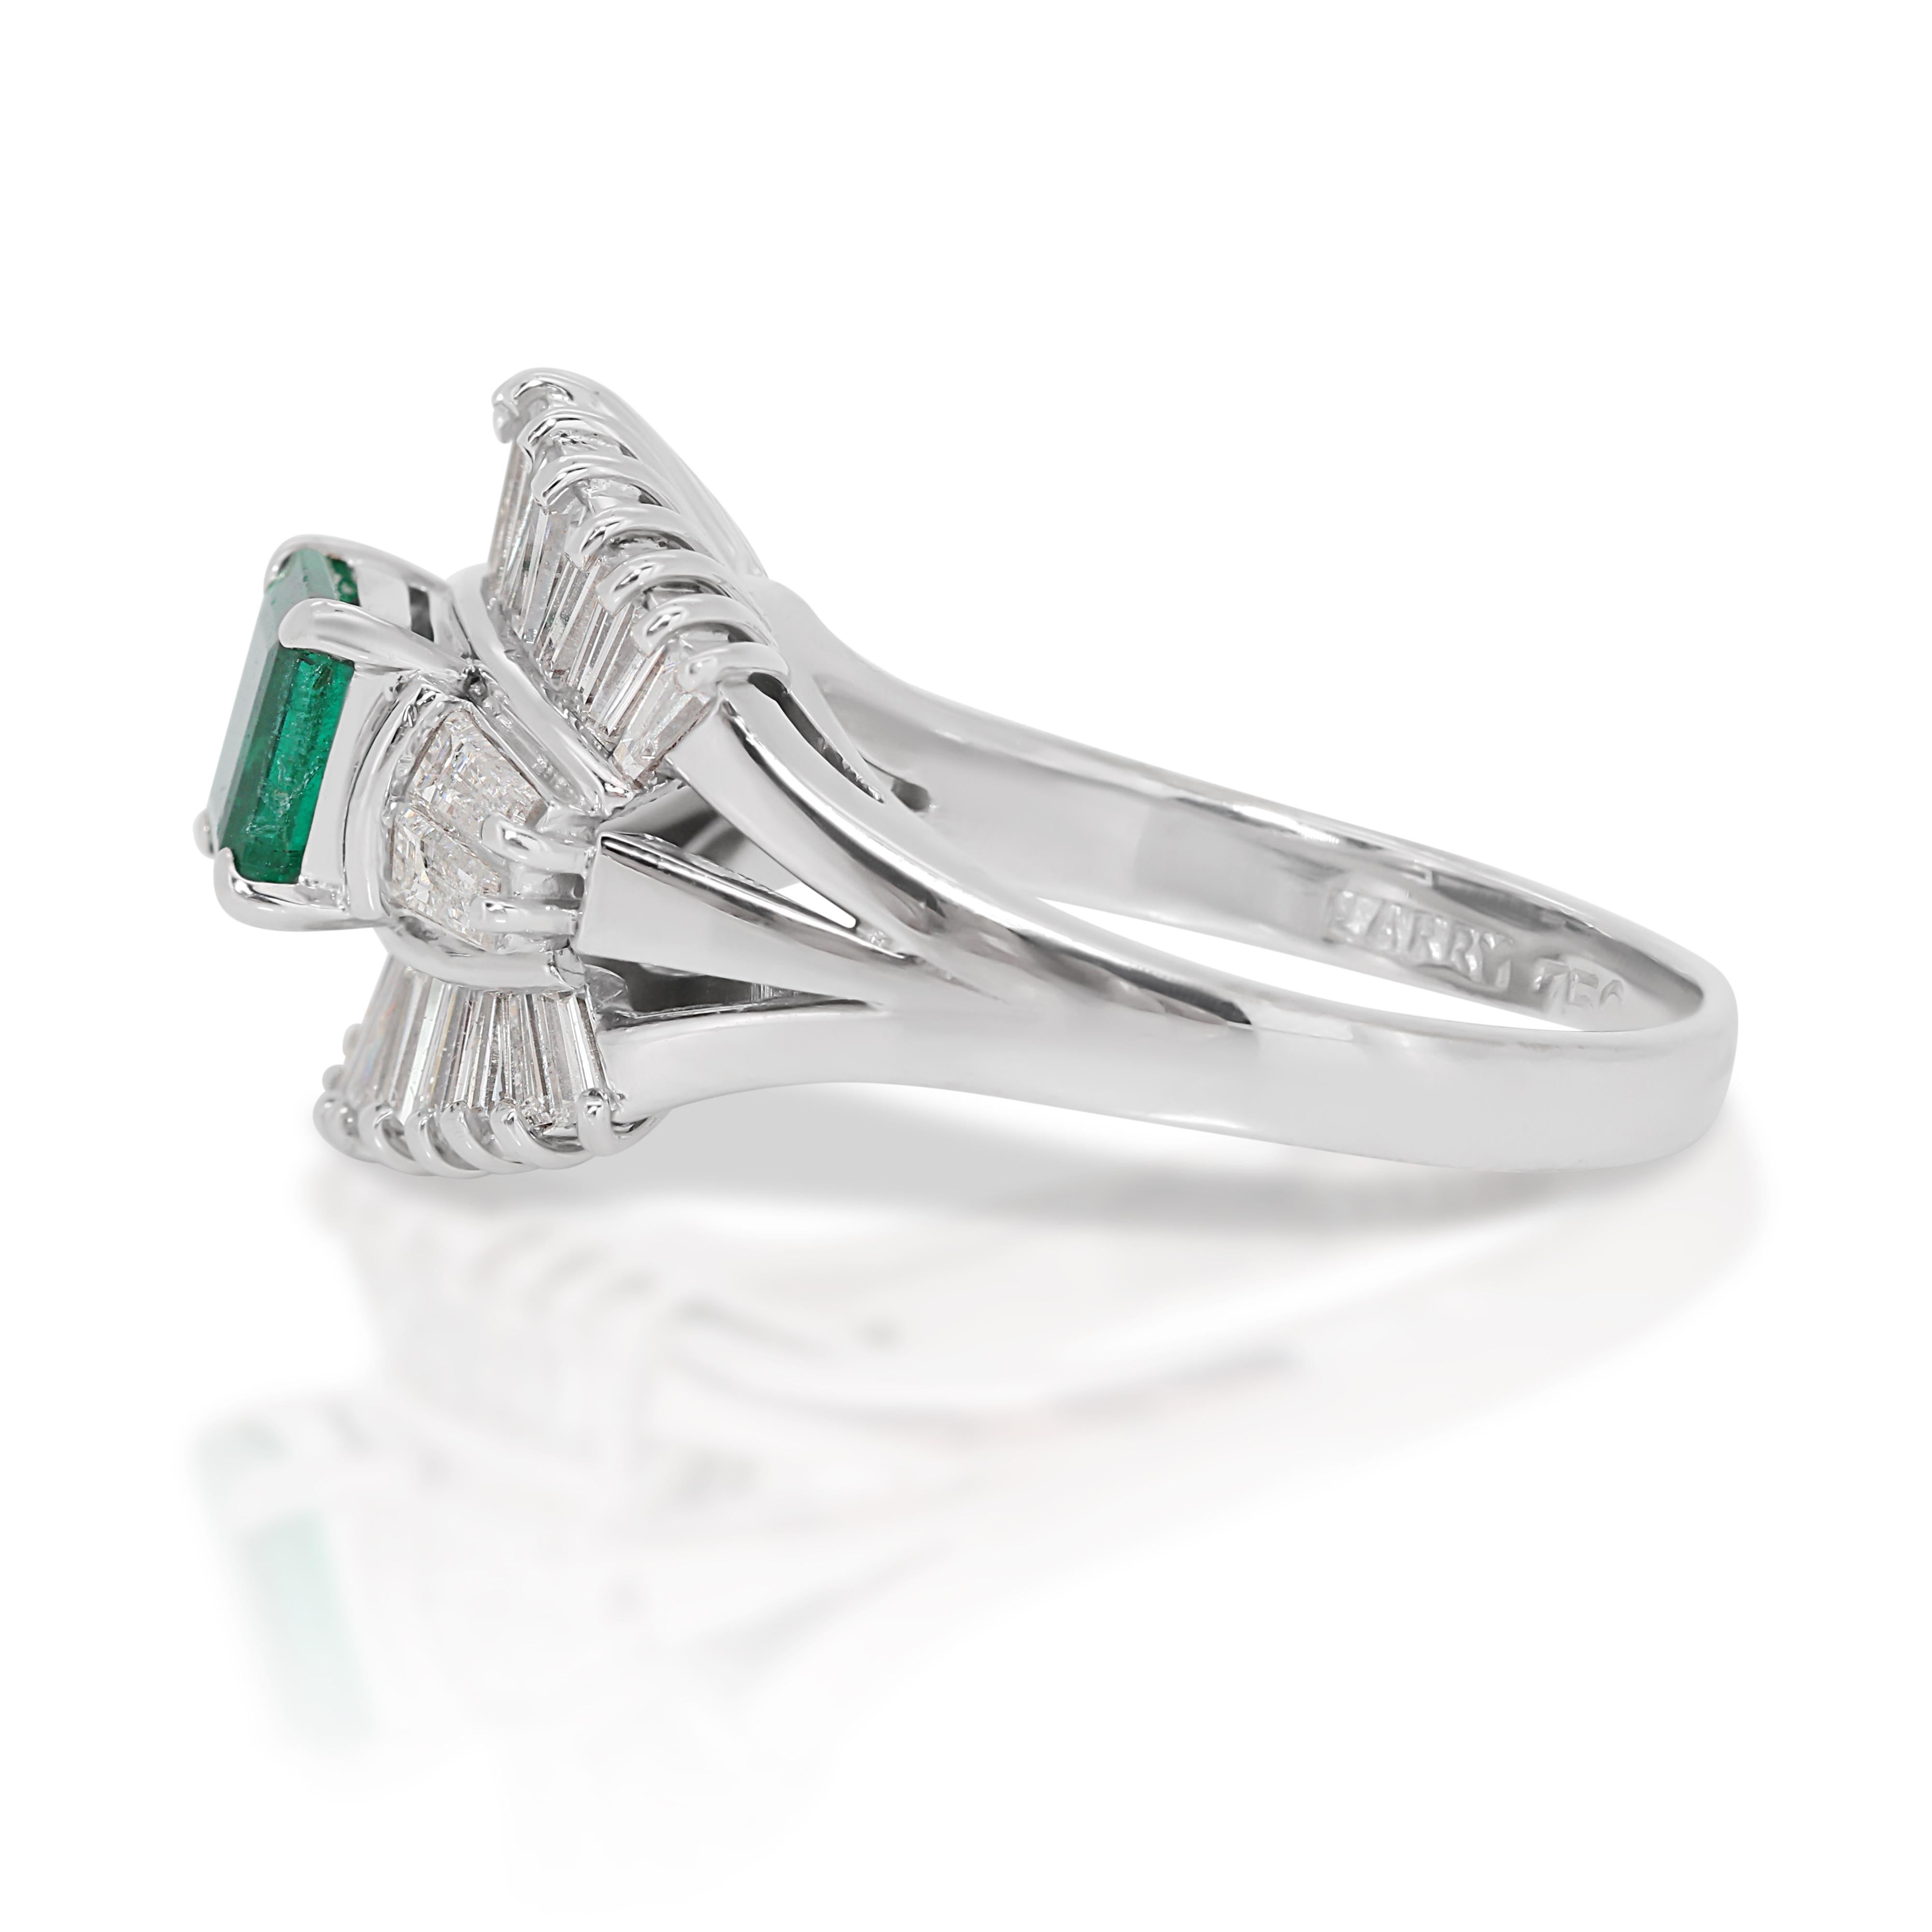 Stunning 2.08ct Emerald and Diamonds Halo Ring in 18k White Gold - IGI Certified For Sale 2